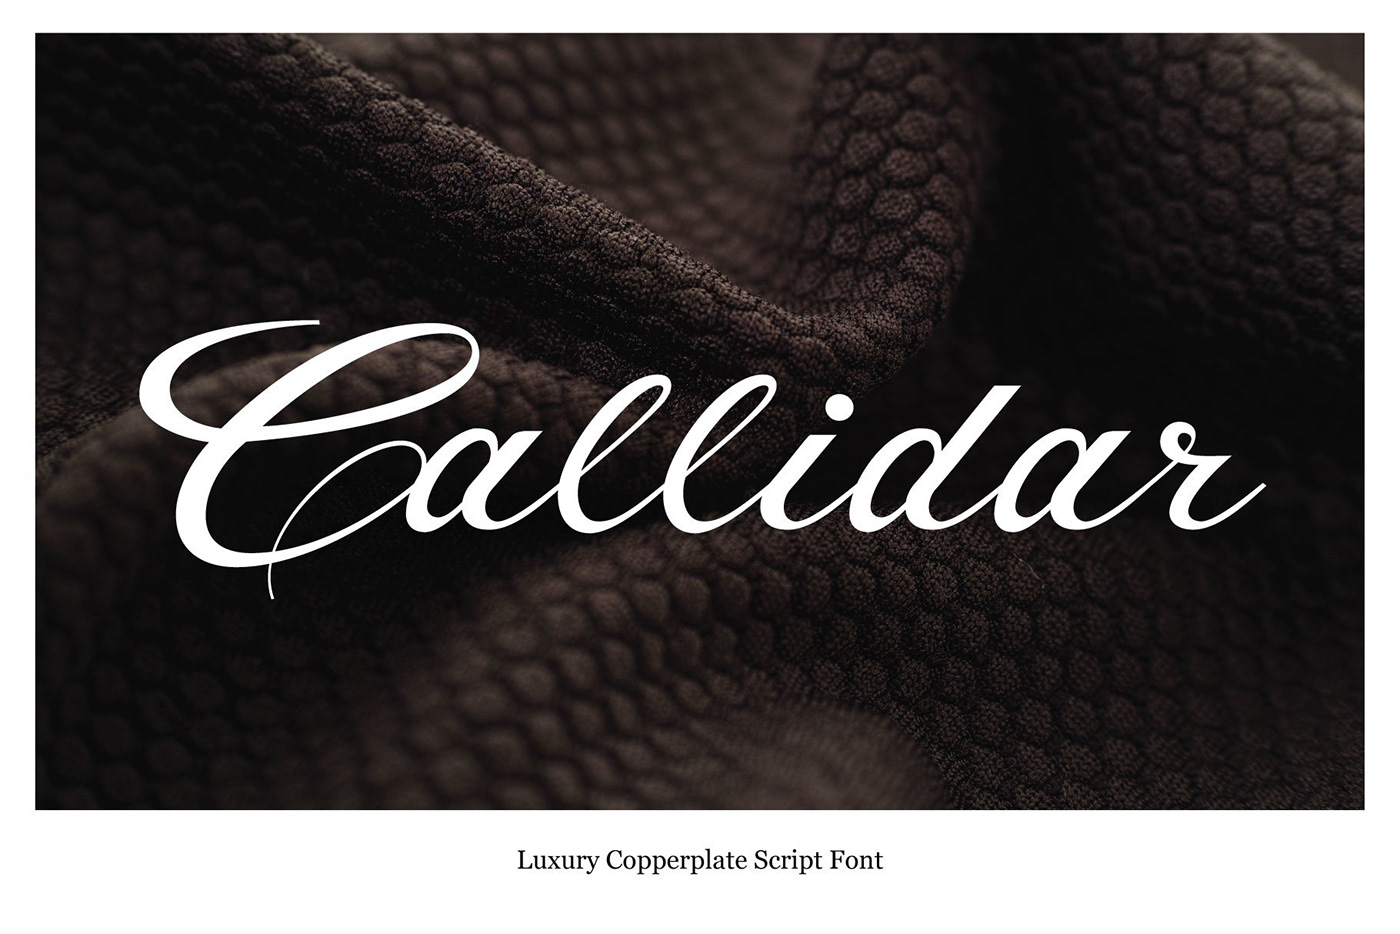 Script copperplate Swashes Logotype logo luxury elegant neat font TREND FONTS Valentines Fonts